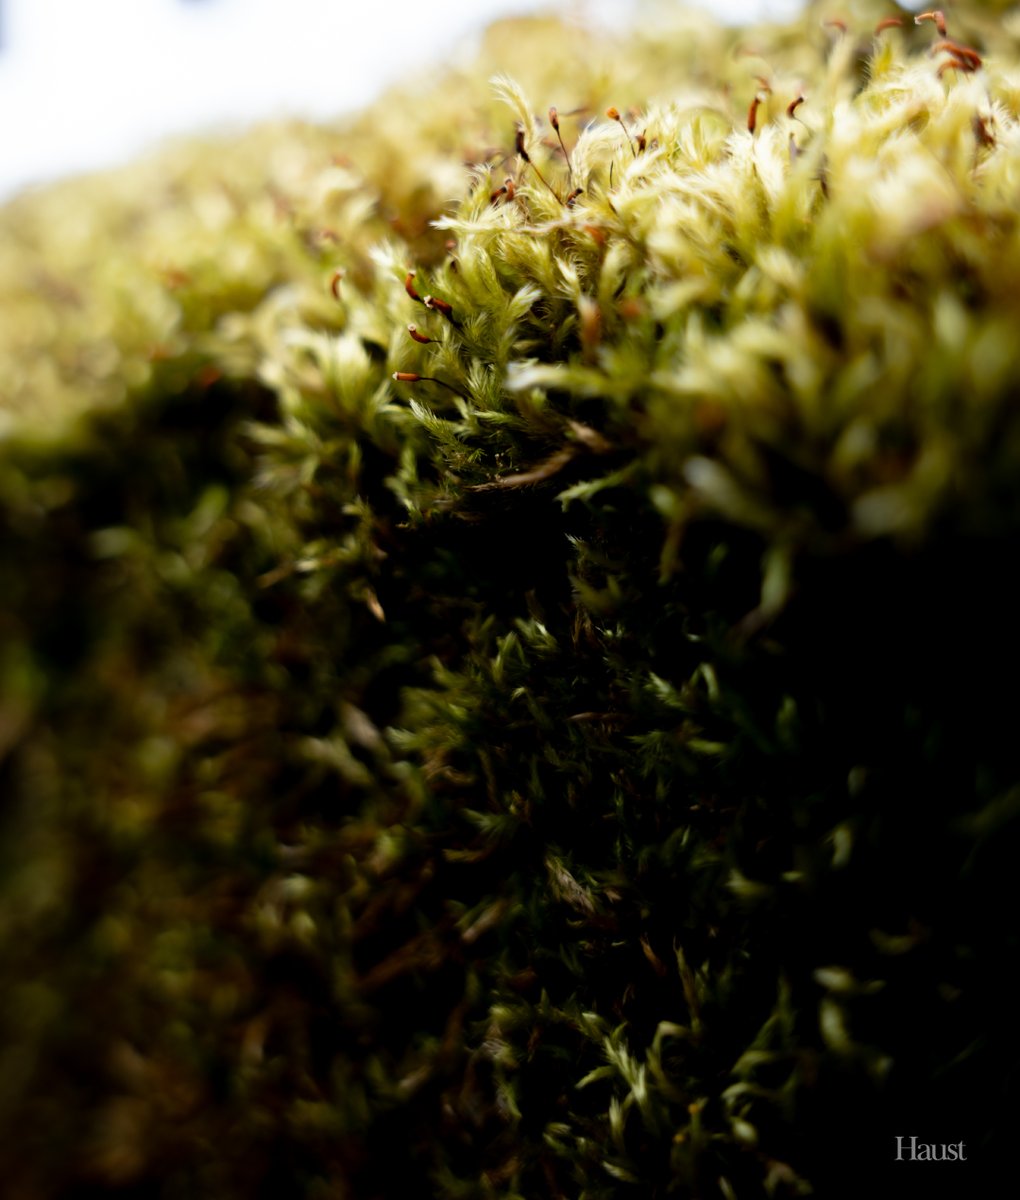 The tiny worlds around us. Look closely 🌿

#macrophotography #nature #NaturePhotography #photographer #photography #PhotographyIsArt  #landscapephotography #moss